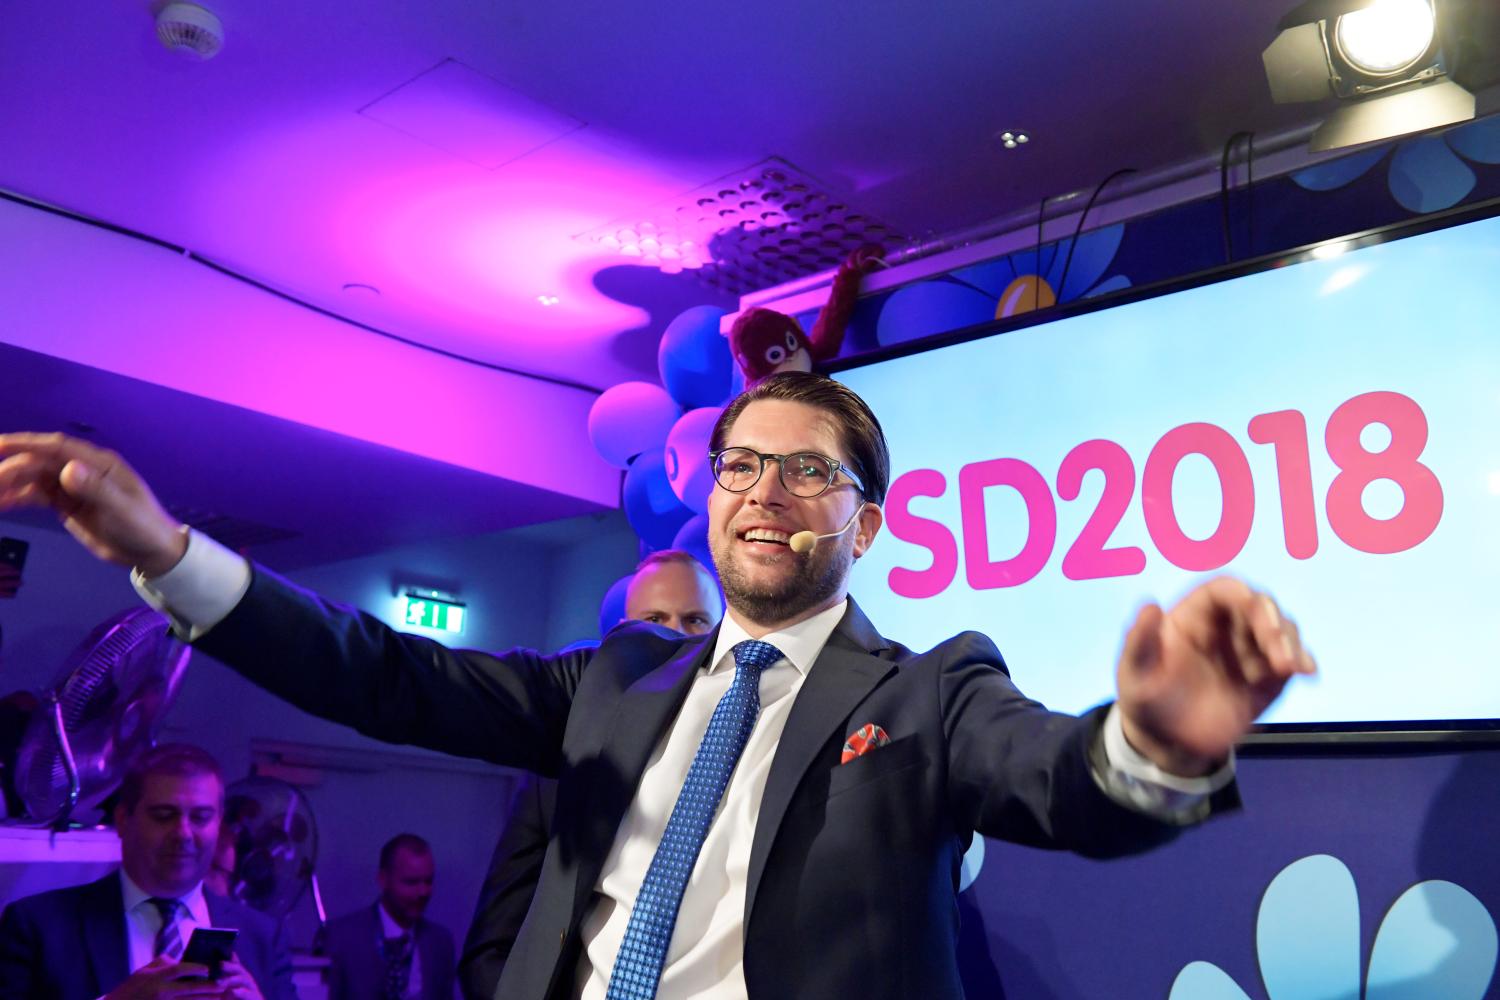 The Rise of Sweden Democrats: Islam, Populism and the End of